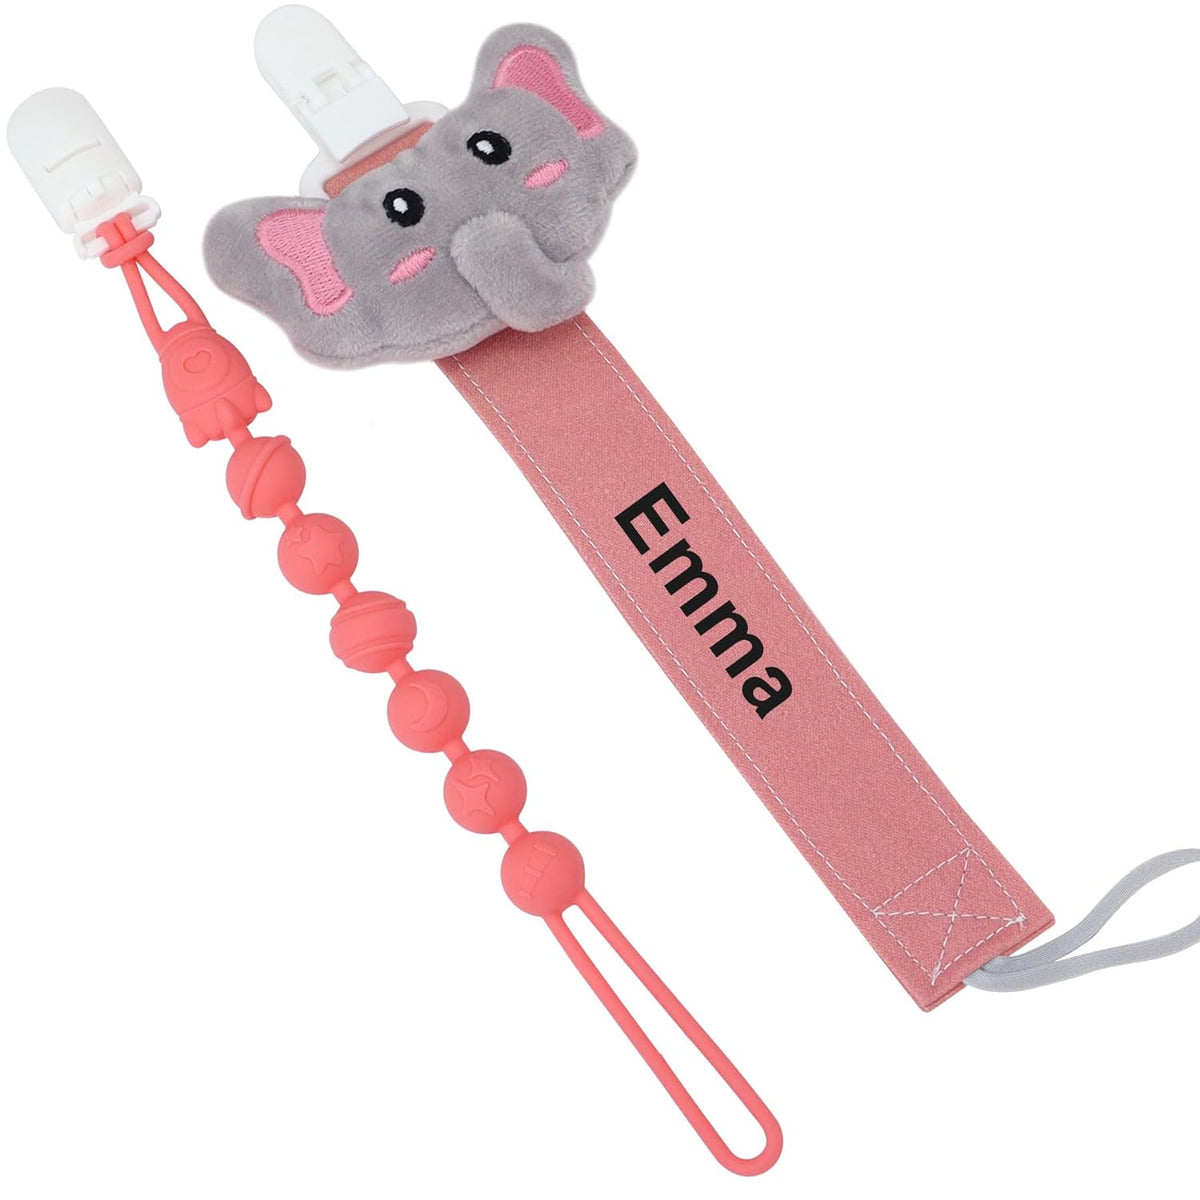 Munchewy Personalized Pacifier Clip with Name, Customized Pacifier Clip with Stuffed Animal, Customized Bab Pacifier Holder Leash (Elephant Pink)